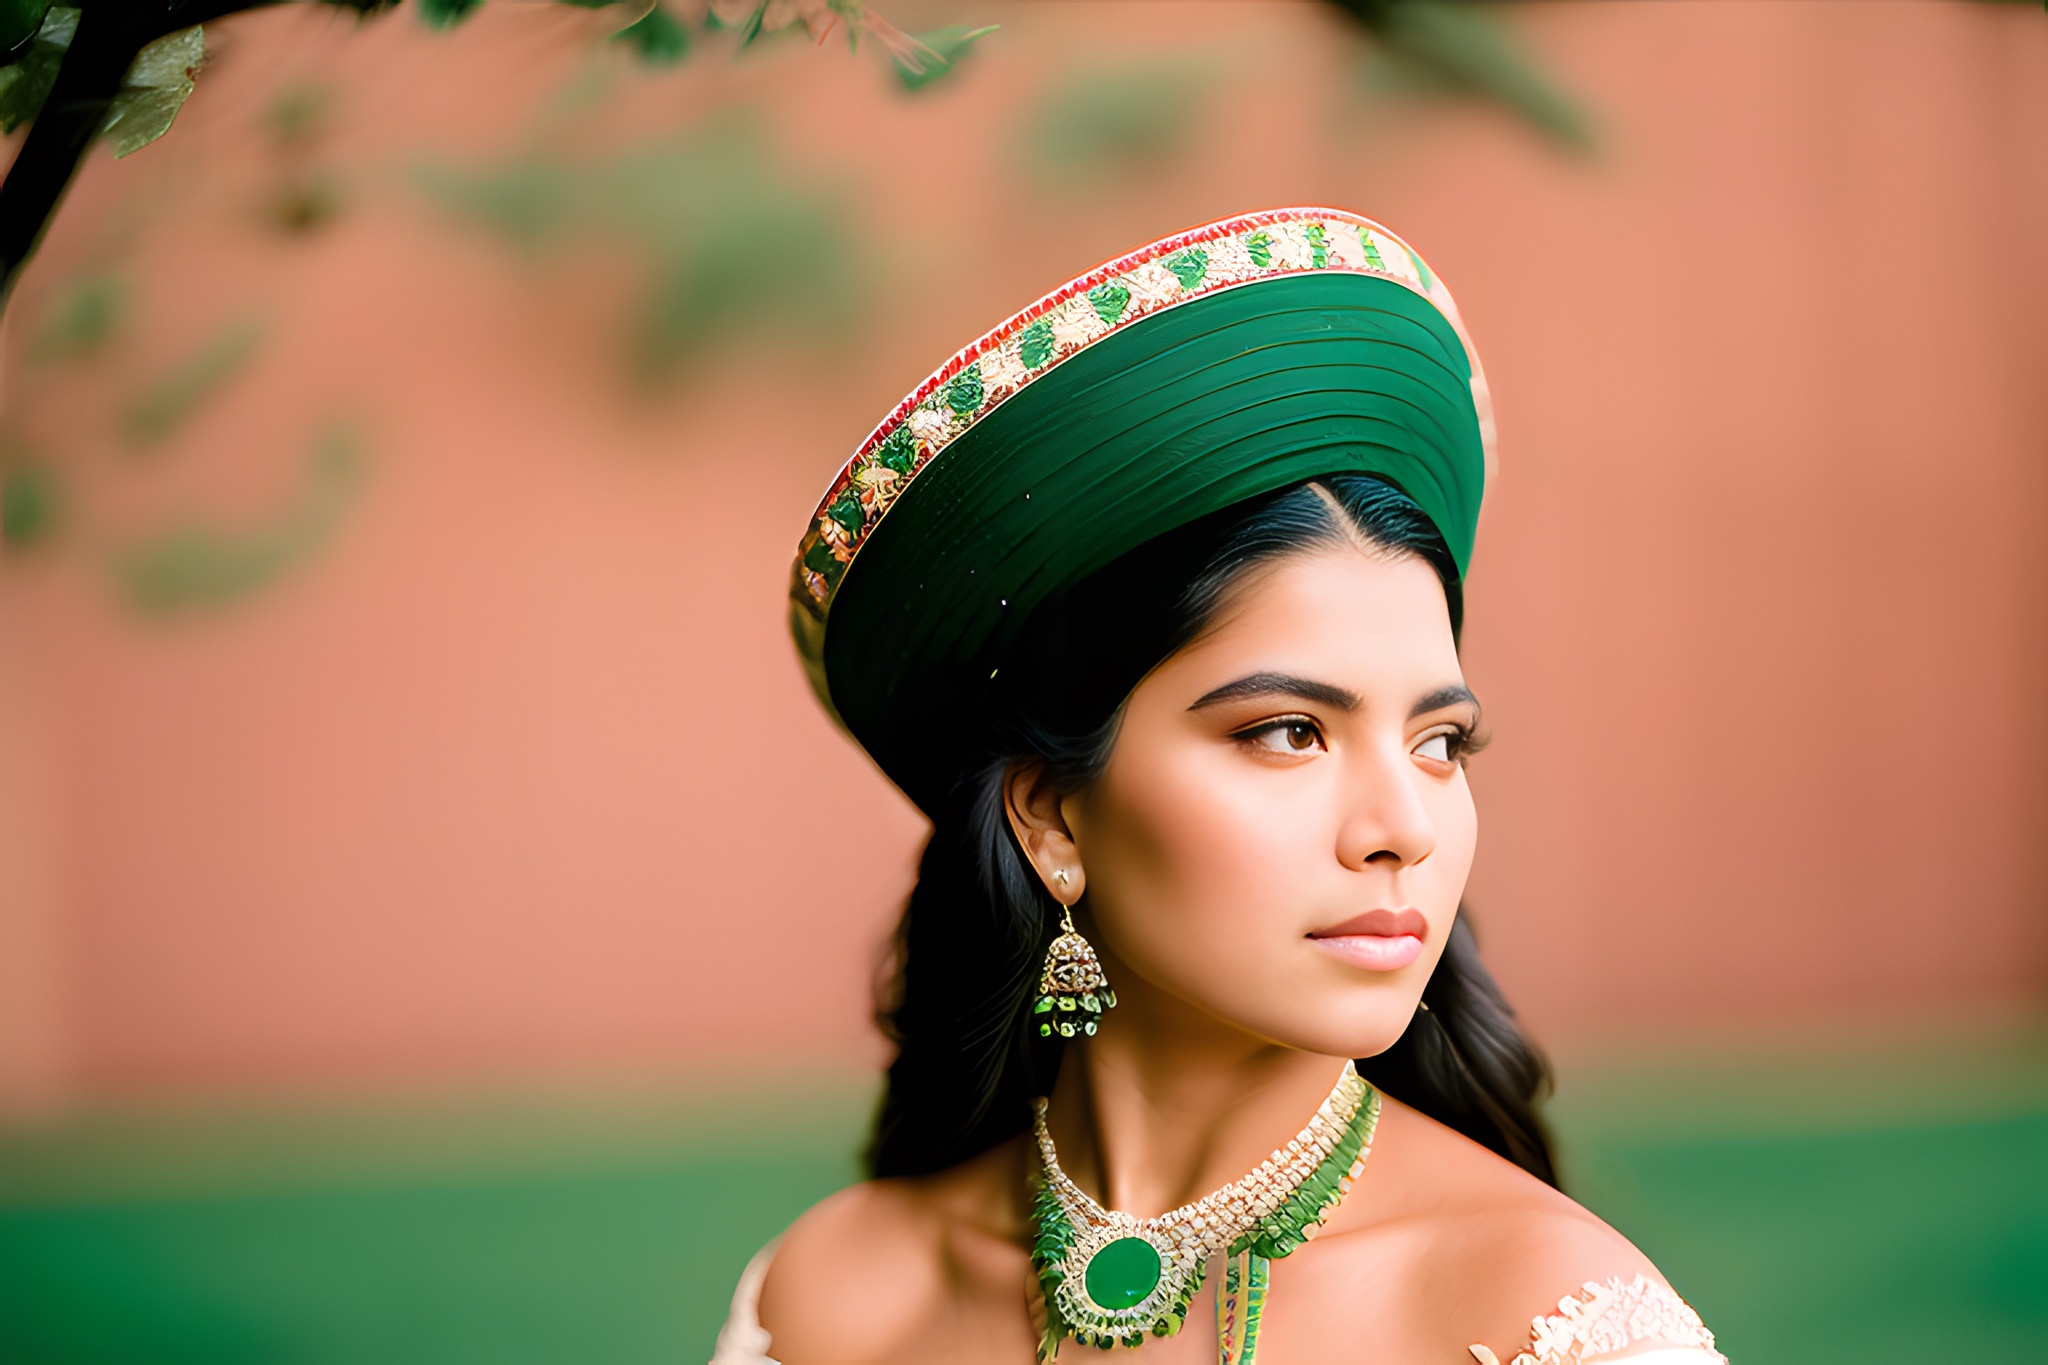 Highly-detailed-portrait-photo-of-a-Mexican-woman-5dx4